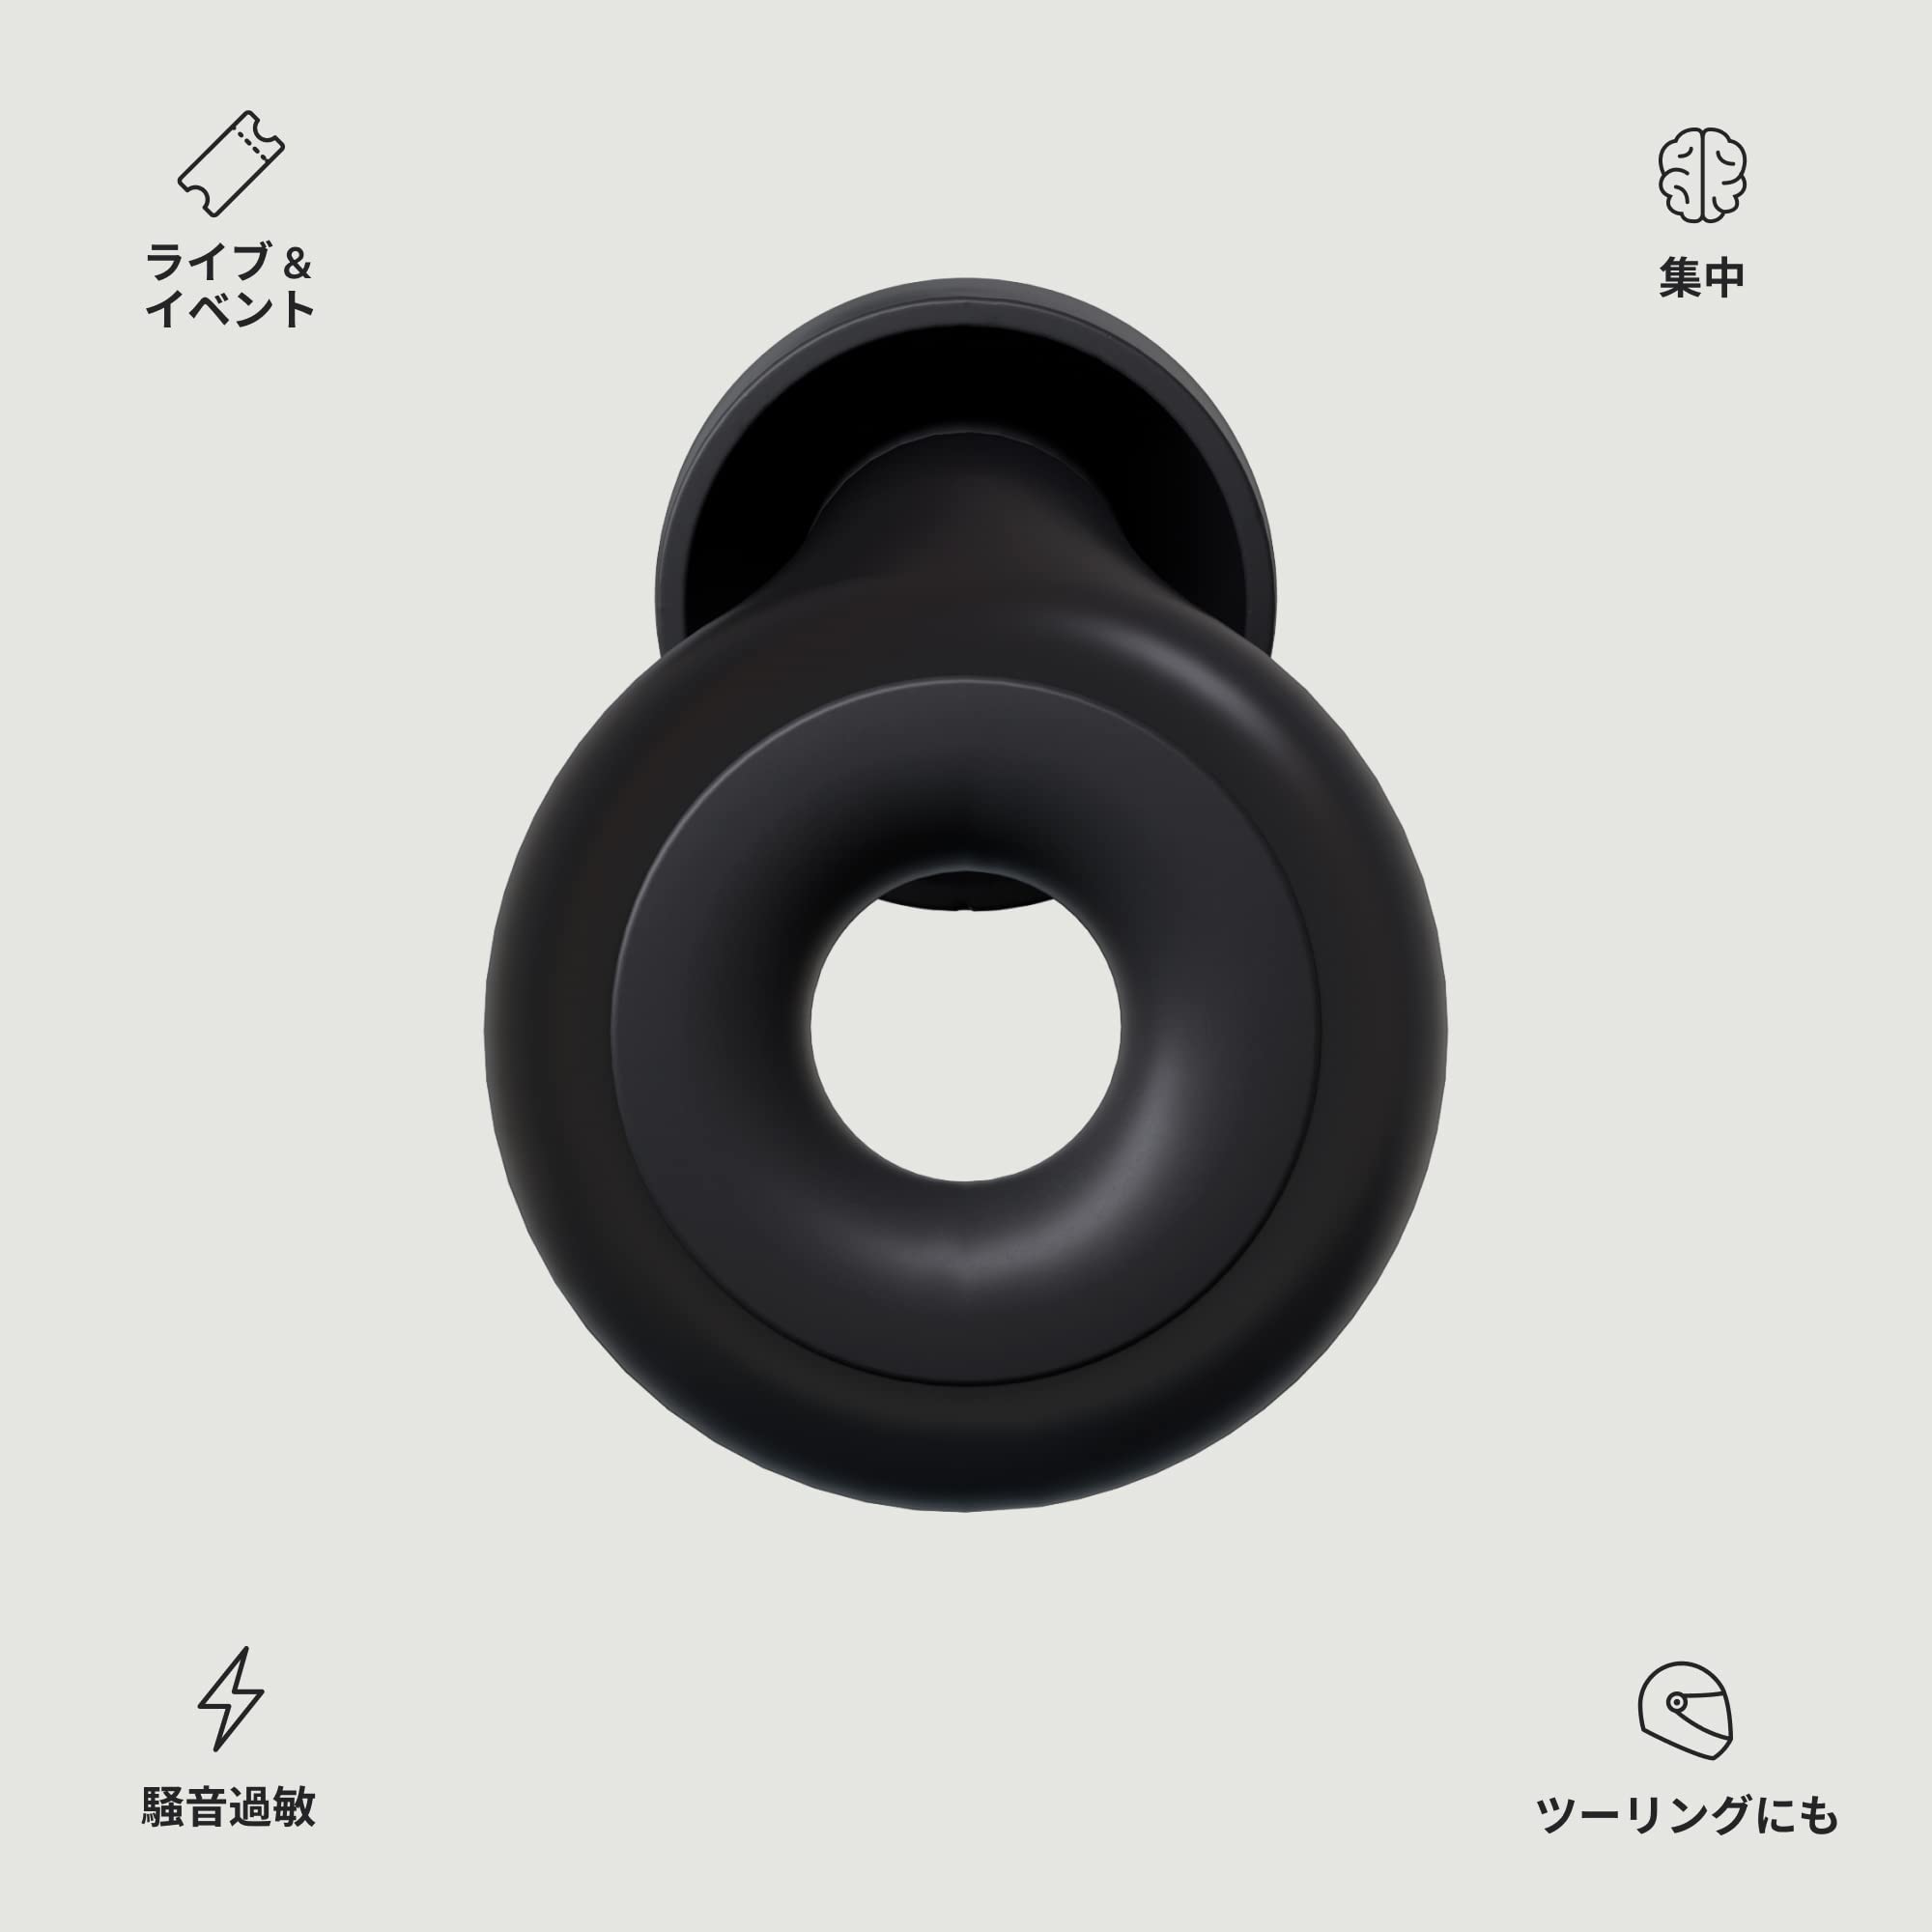 Buy Loop Experience Plus Earplugs - Noise Reduction (SNR) 18dB Premium  Earplugs. Ideal for Parents, Noise Sensitive, Musicians, Gig and Bike  Tourers, 4(XS-L) sizes for best fit - black from Japan 